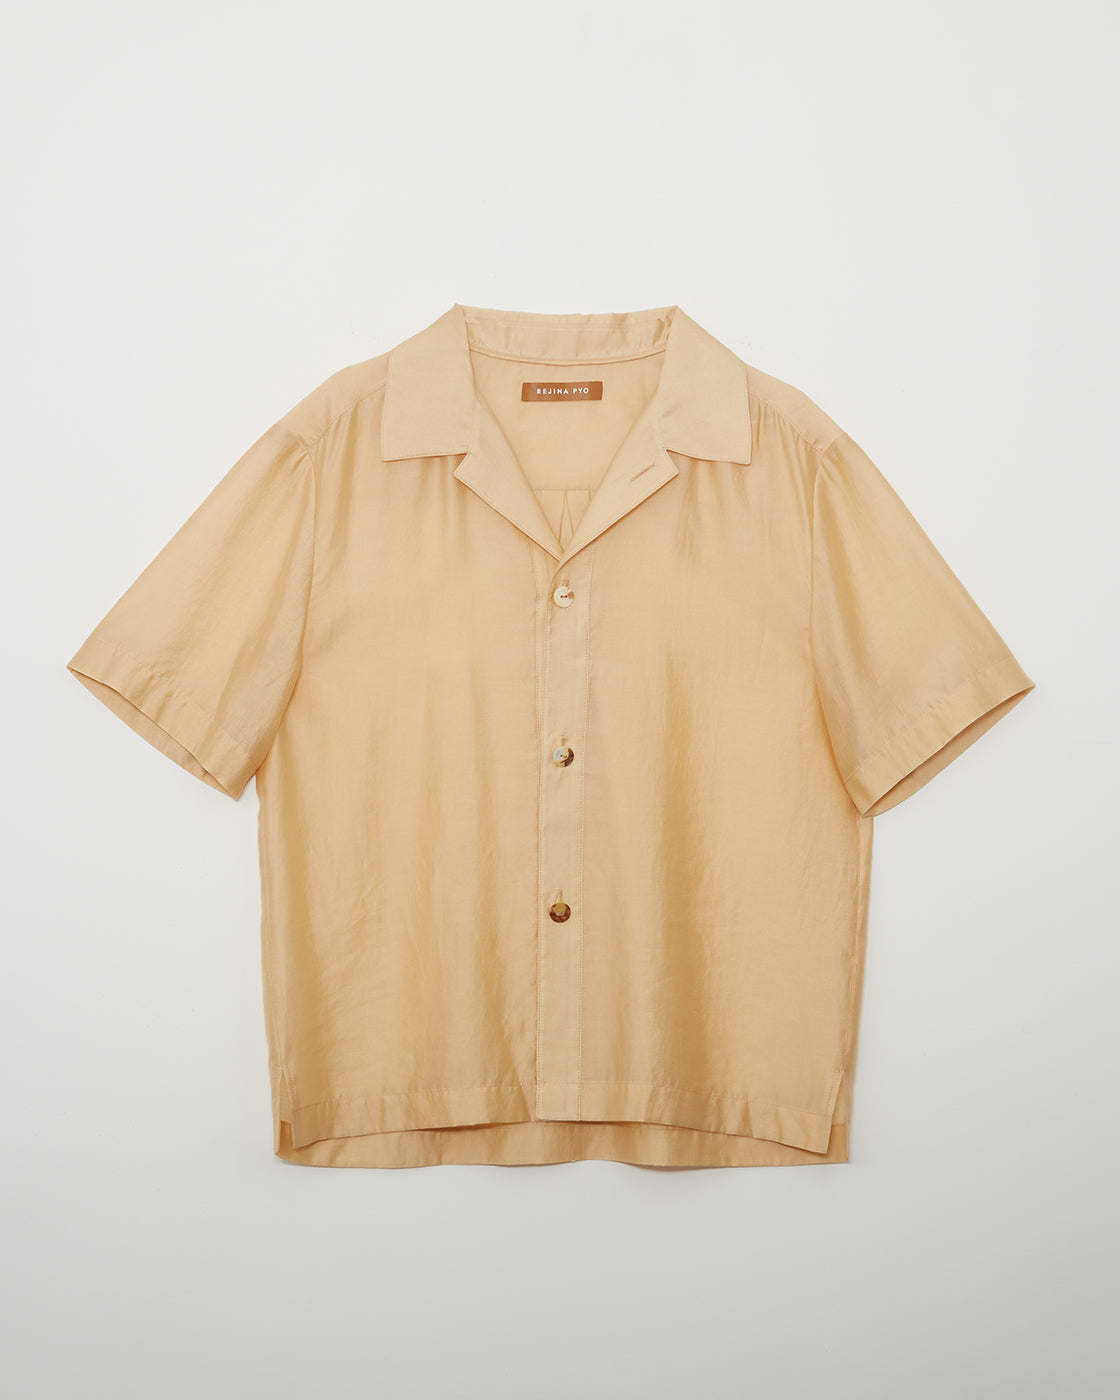 Marty Shirt Tencel Blend Tan - Special Price